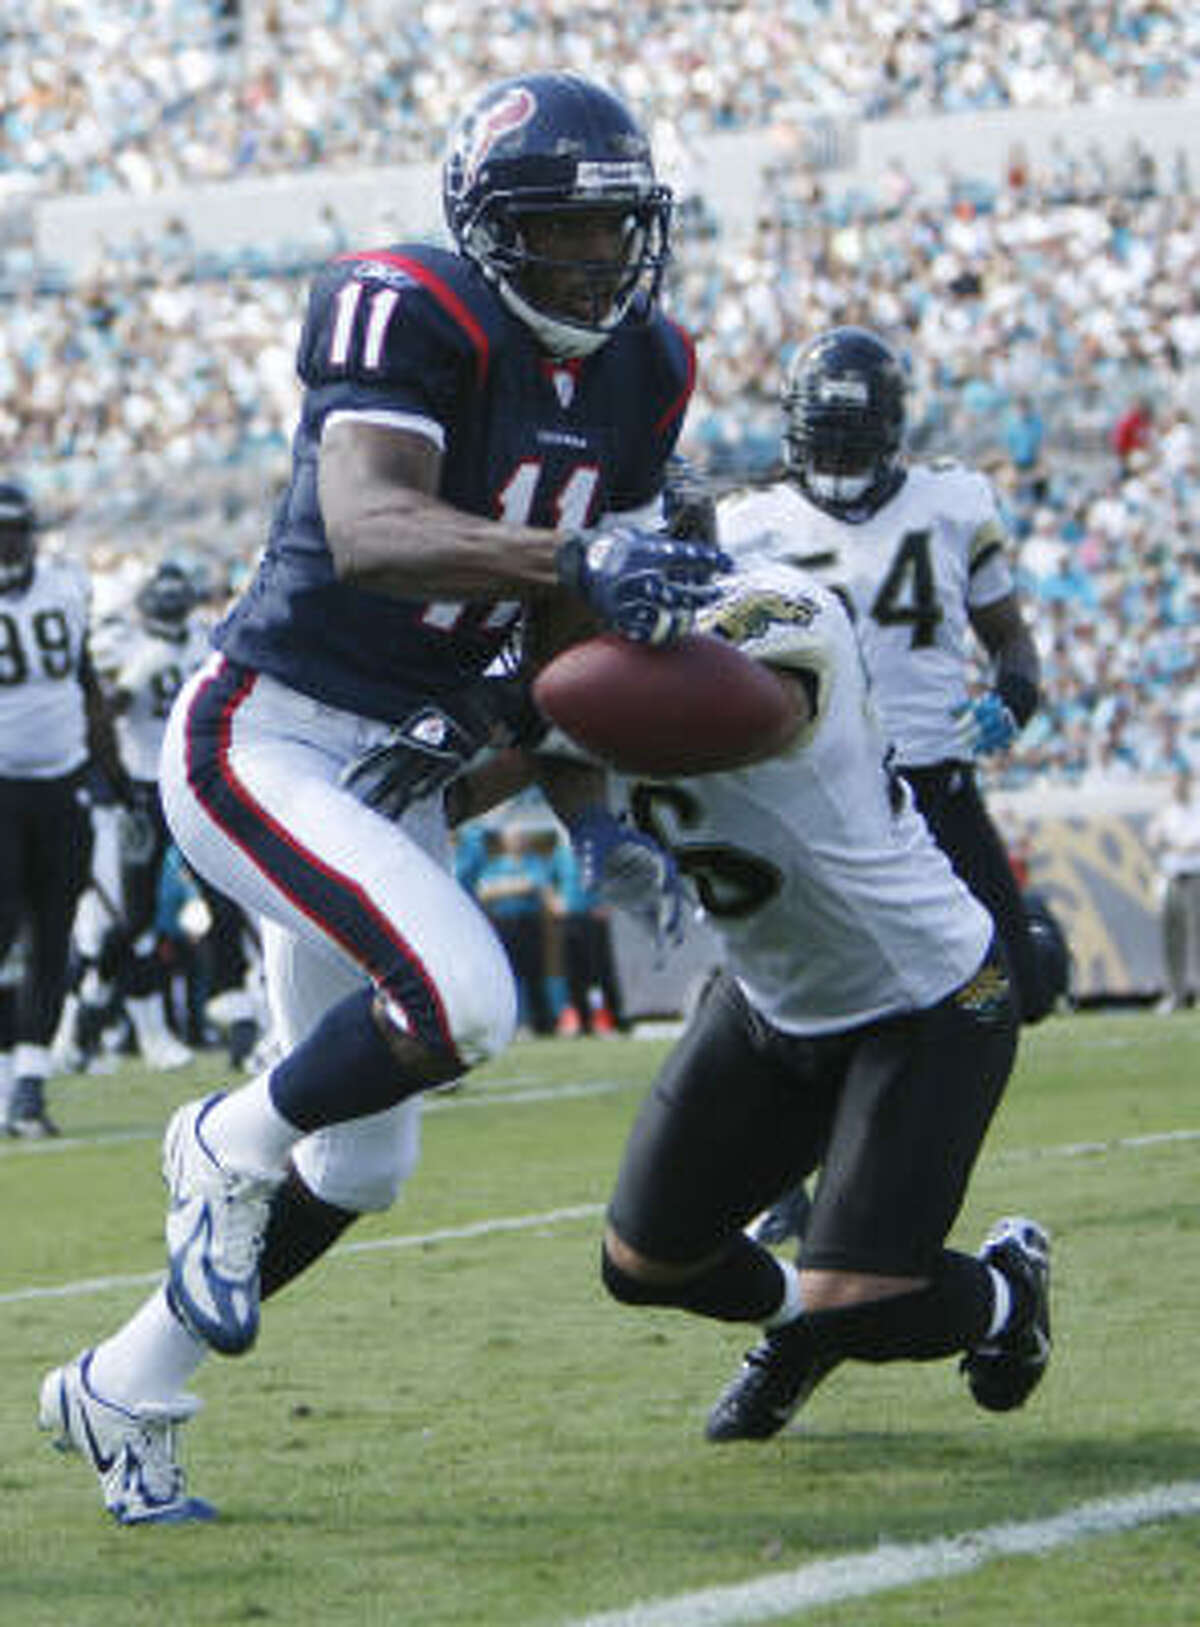 Poised to take an early lead Sunday at Jacksonville, the Texans instead came away with no points as Andre Davis fumbled just before crossing the goal line when hit by the Jaguars' Sammy Knight.